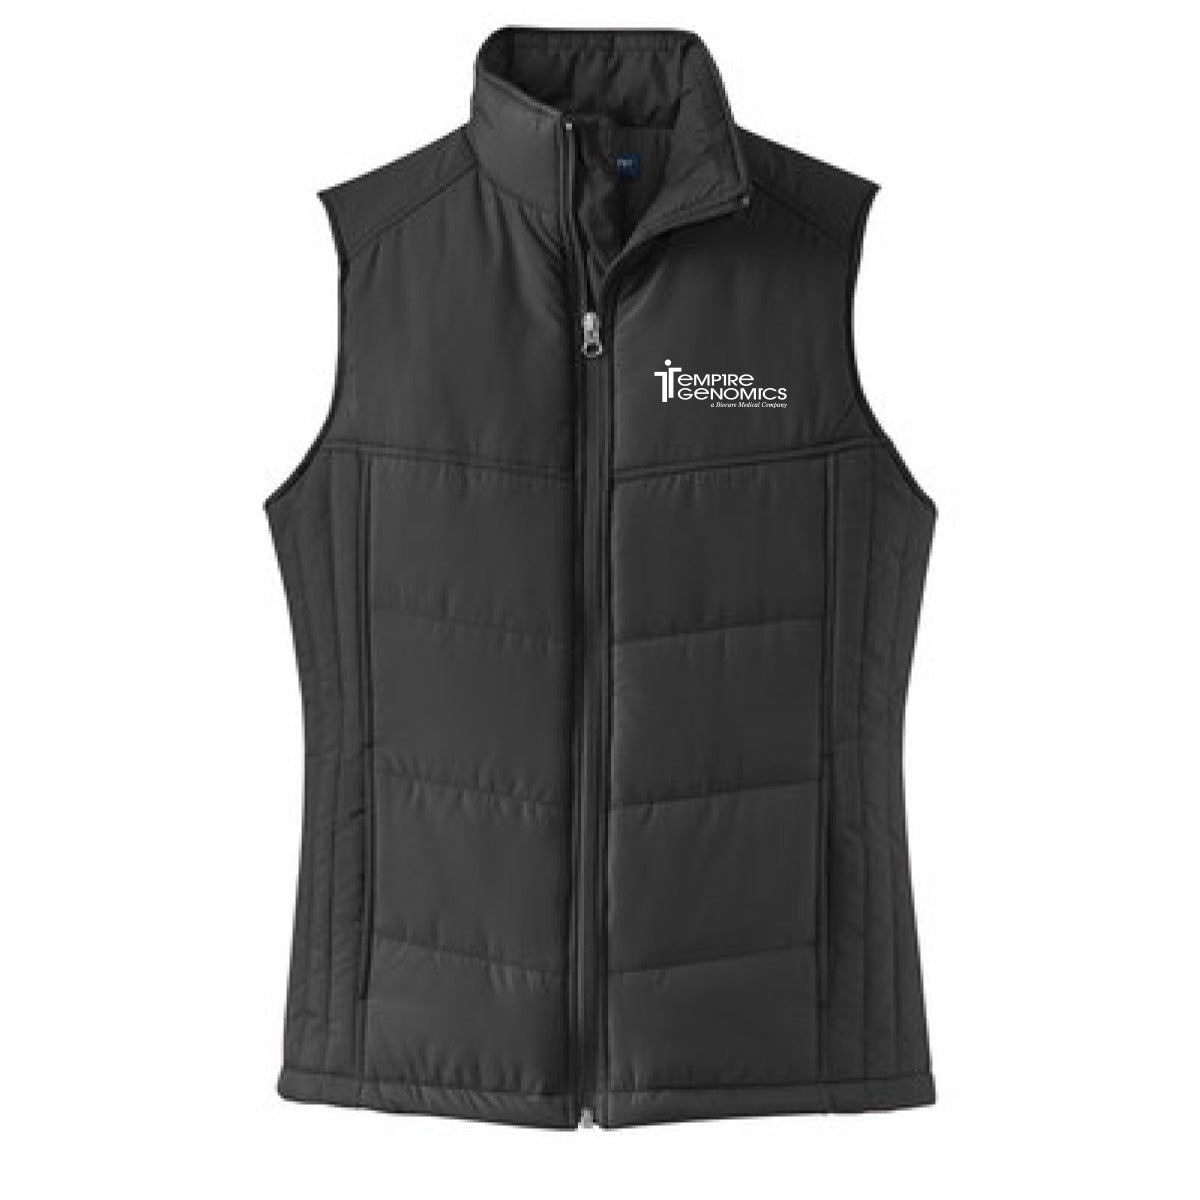 Port Authority Ladies Puffy Vest - Biocare Medical Company Store